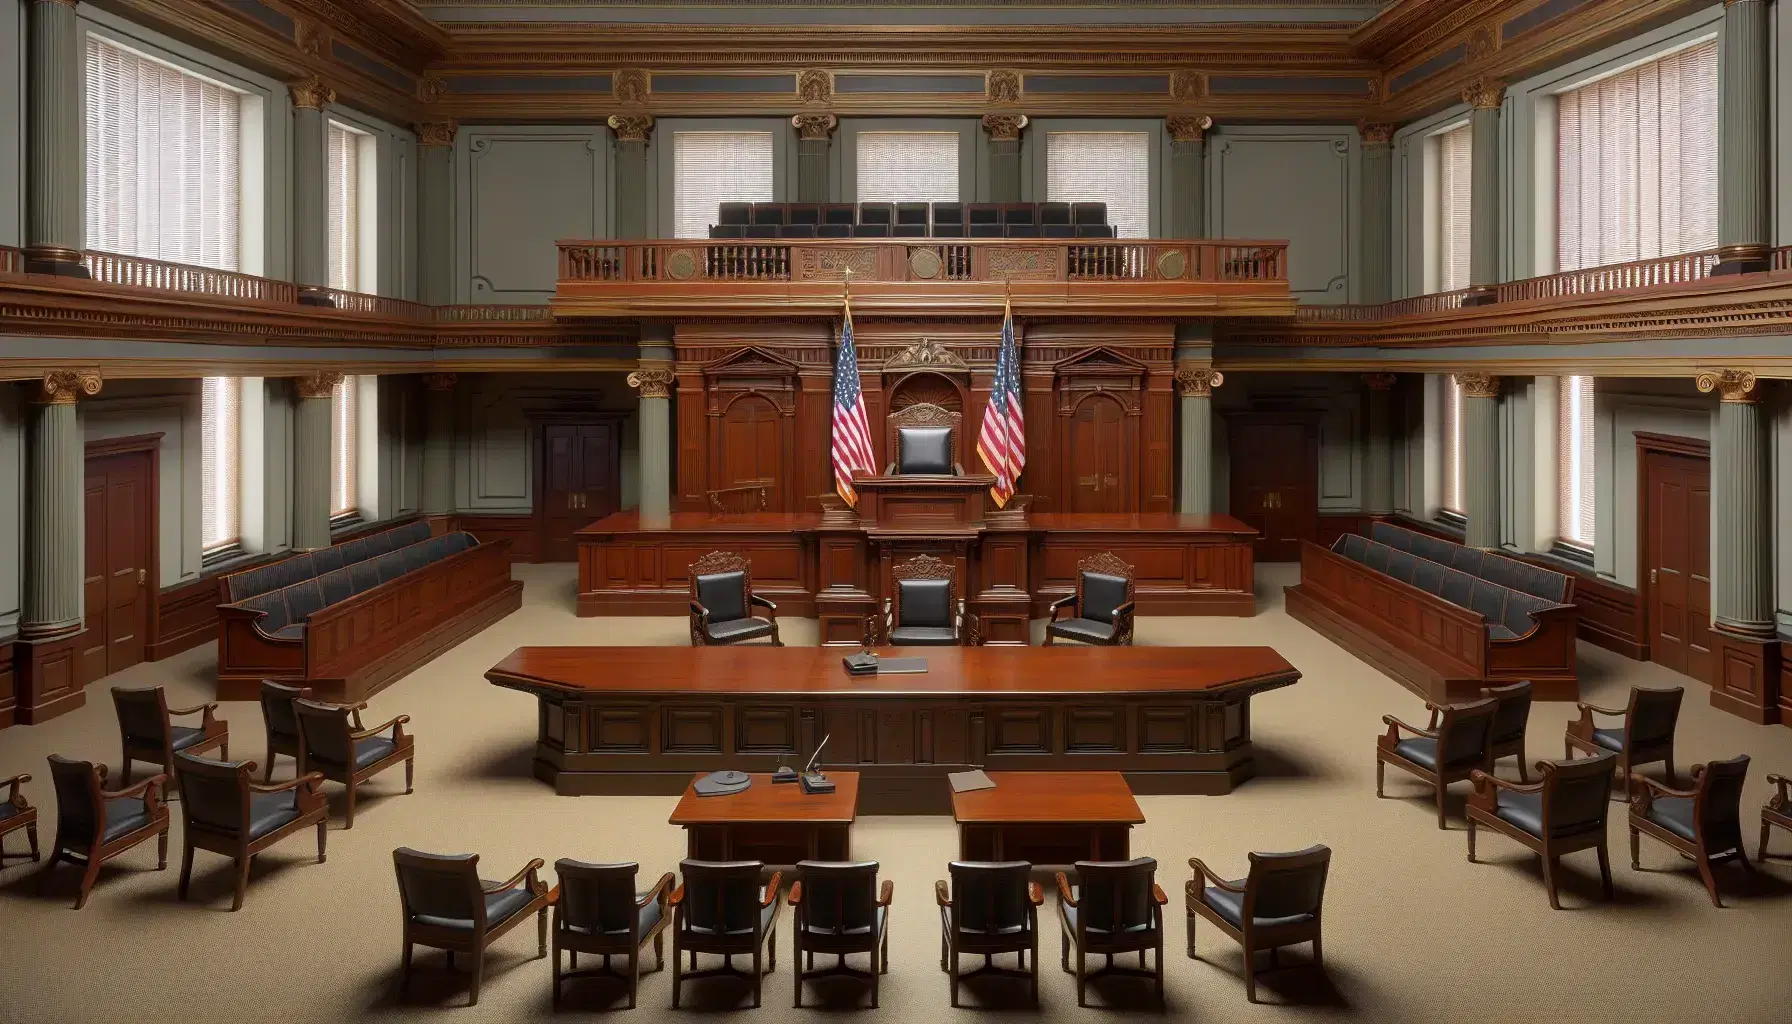 Interior of a majestic courtroom with a dark wood judge's bench, American flags, lawyers' table, jury box and spectator benches.